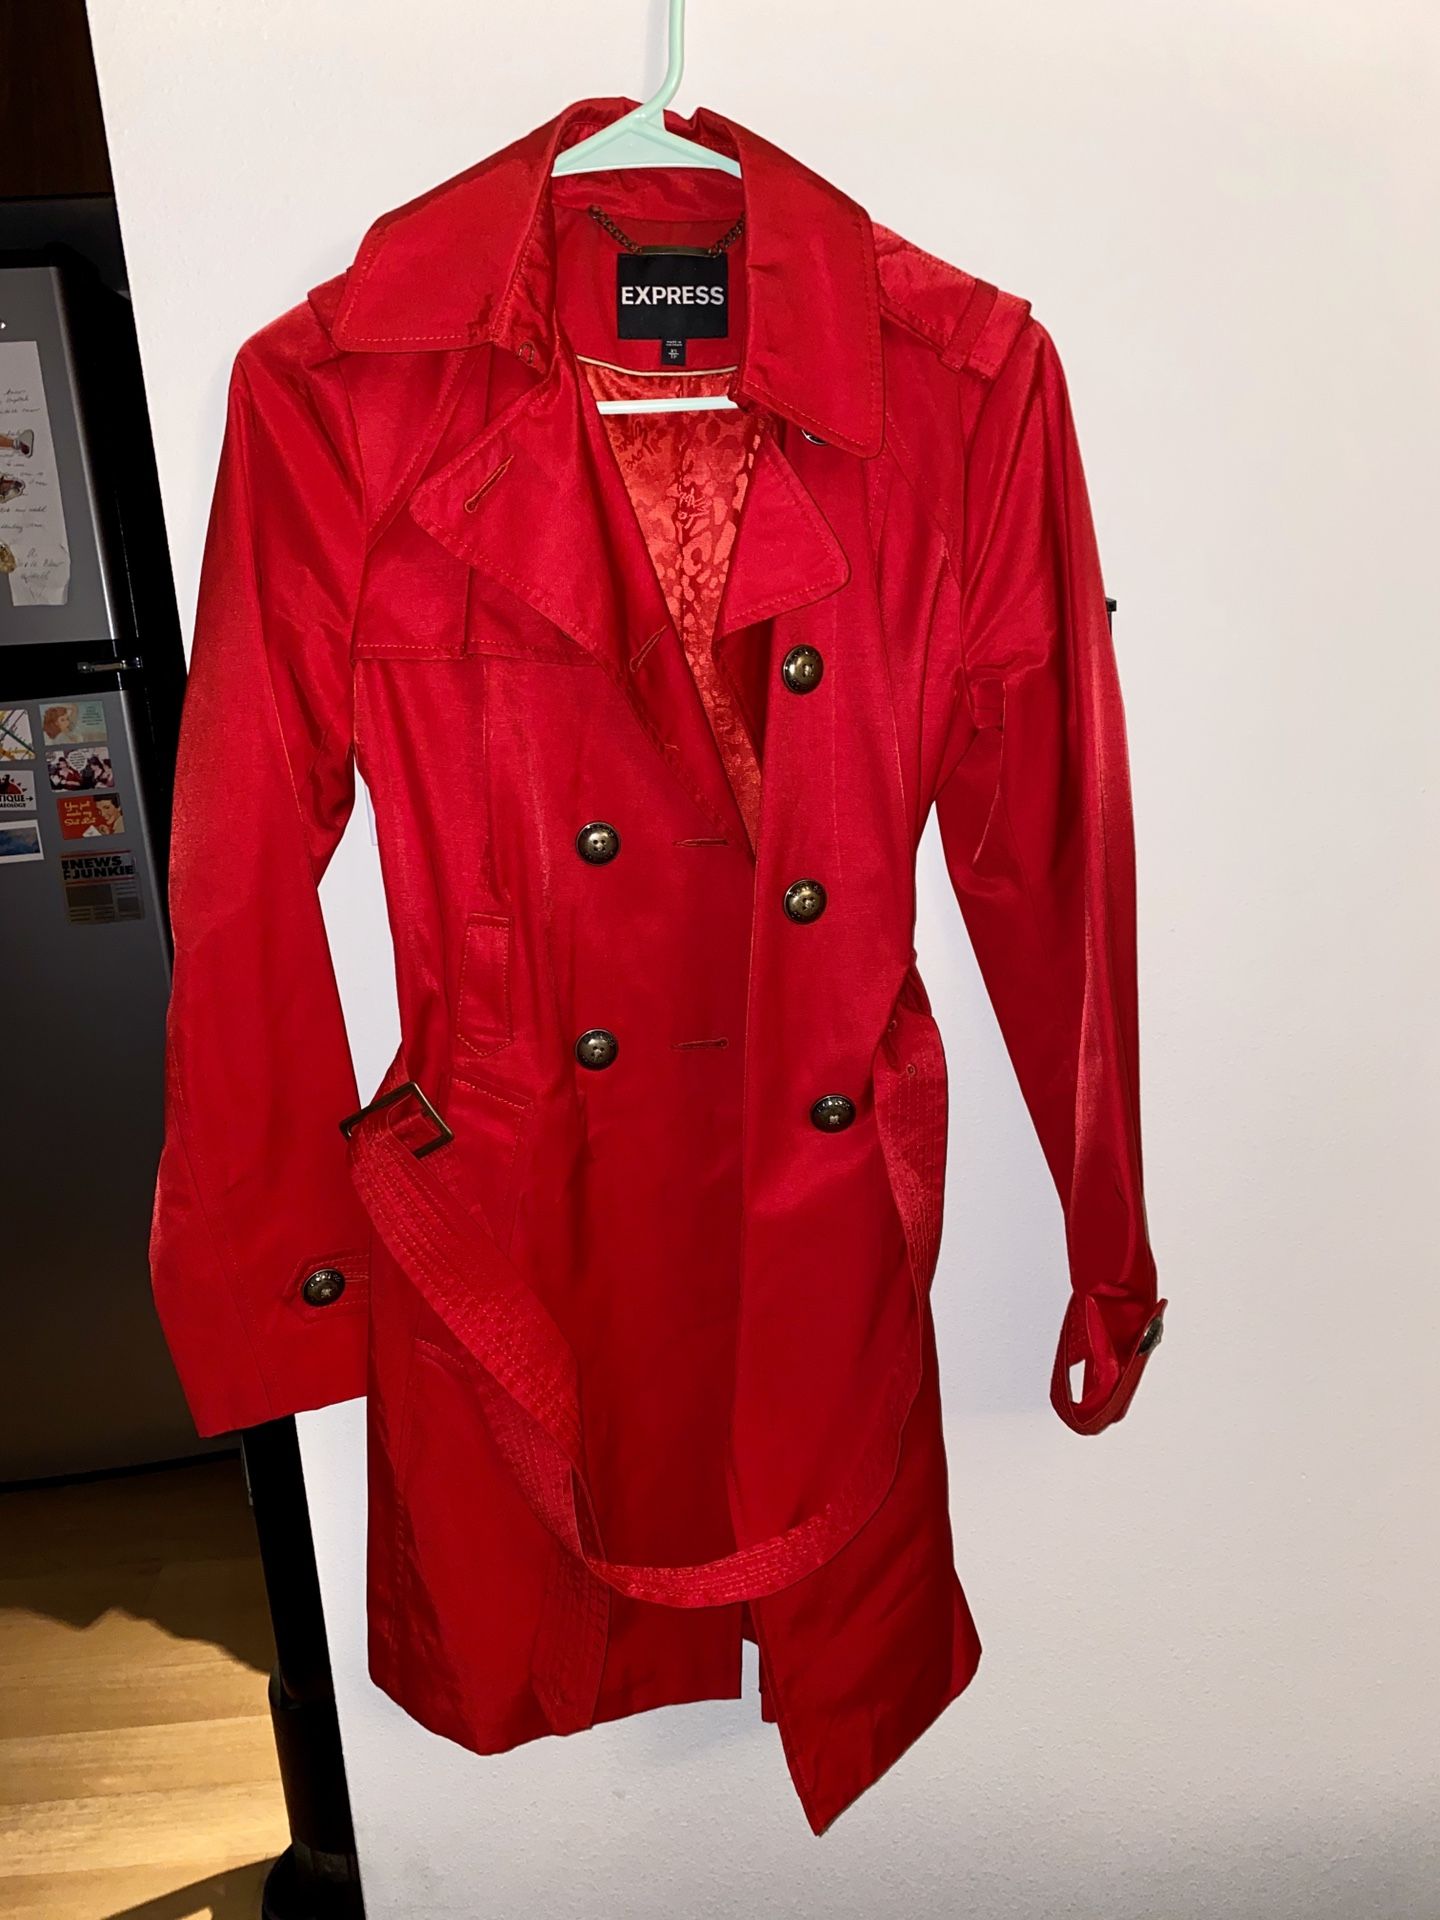 Raincoat Express. Women’s XS the shine is from the flash